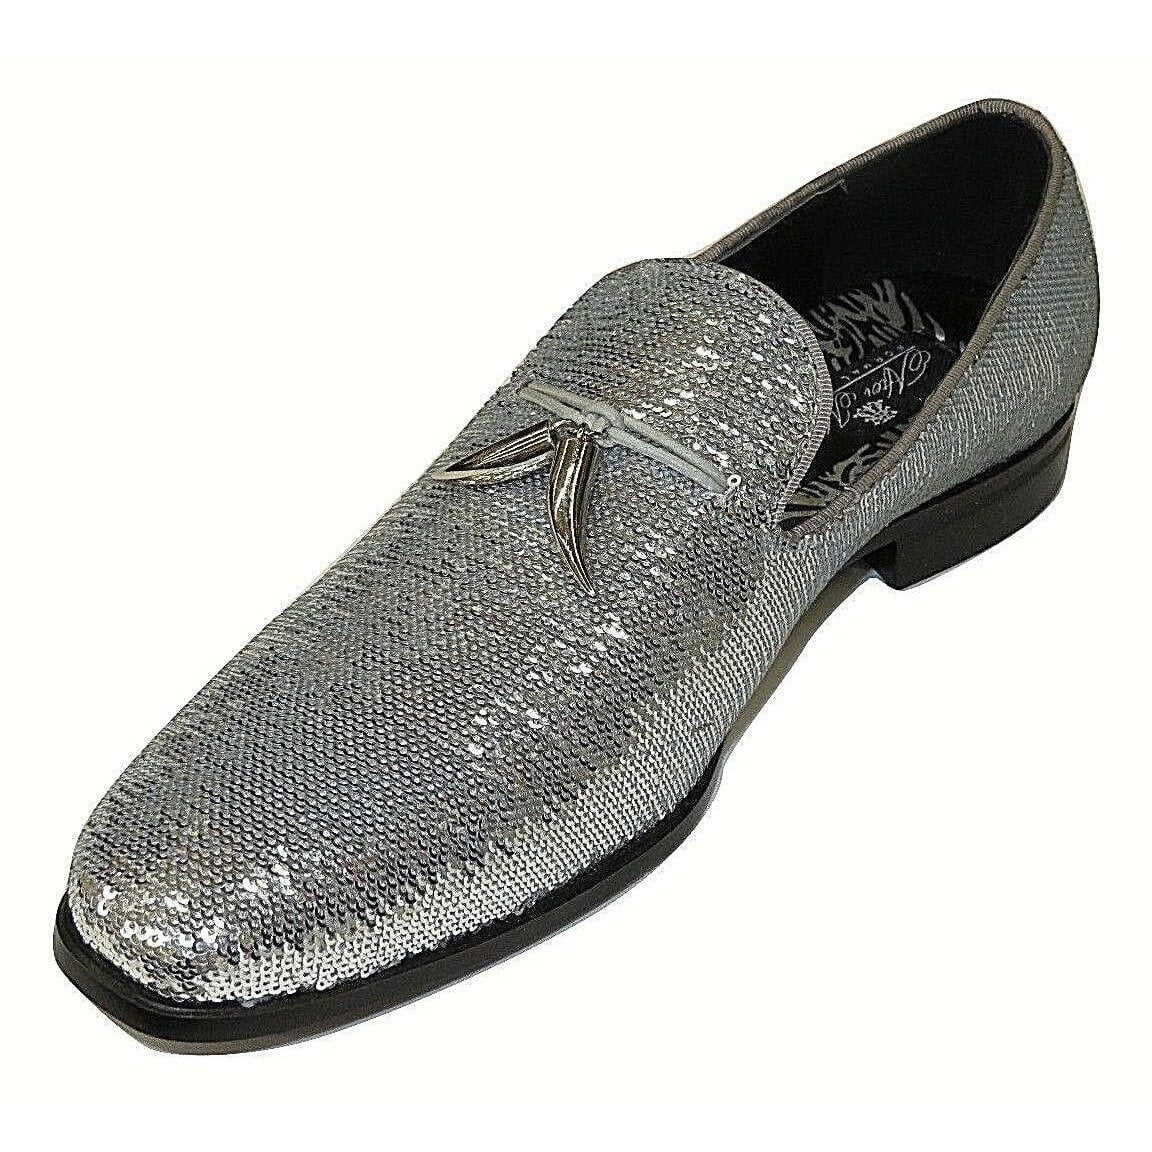 Men AFTER MIDNIGHT Formal Stage Wedding shoes Sequin shiny Slip on 6759 Silver 